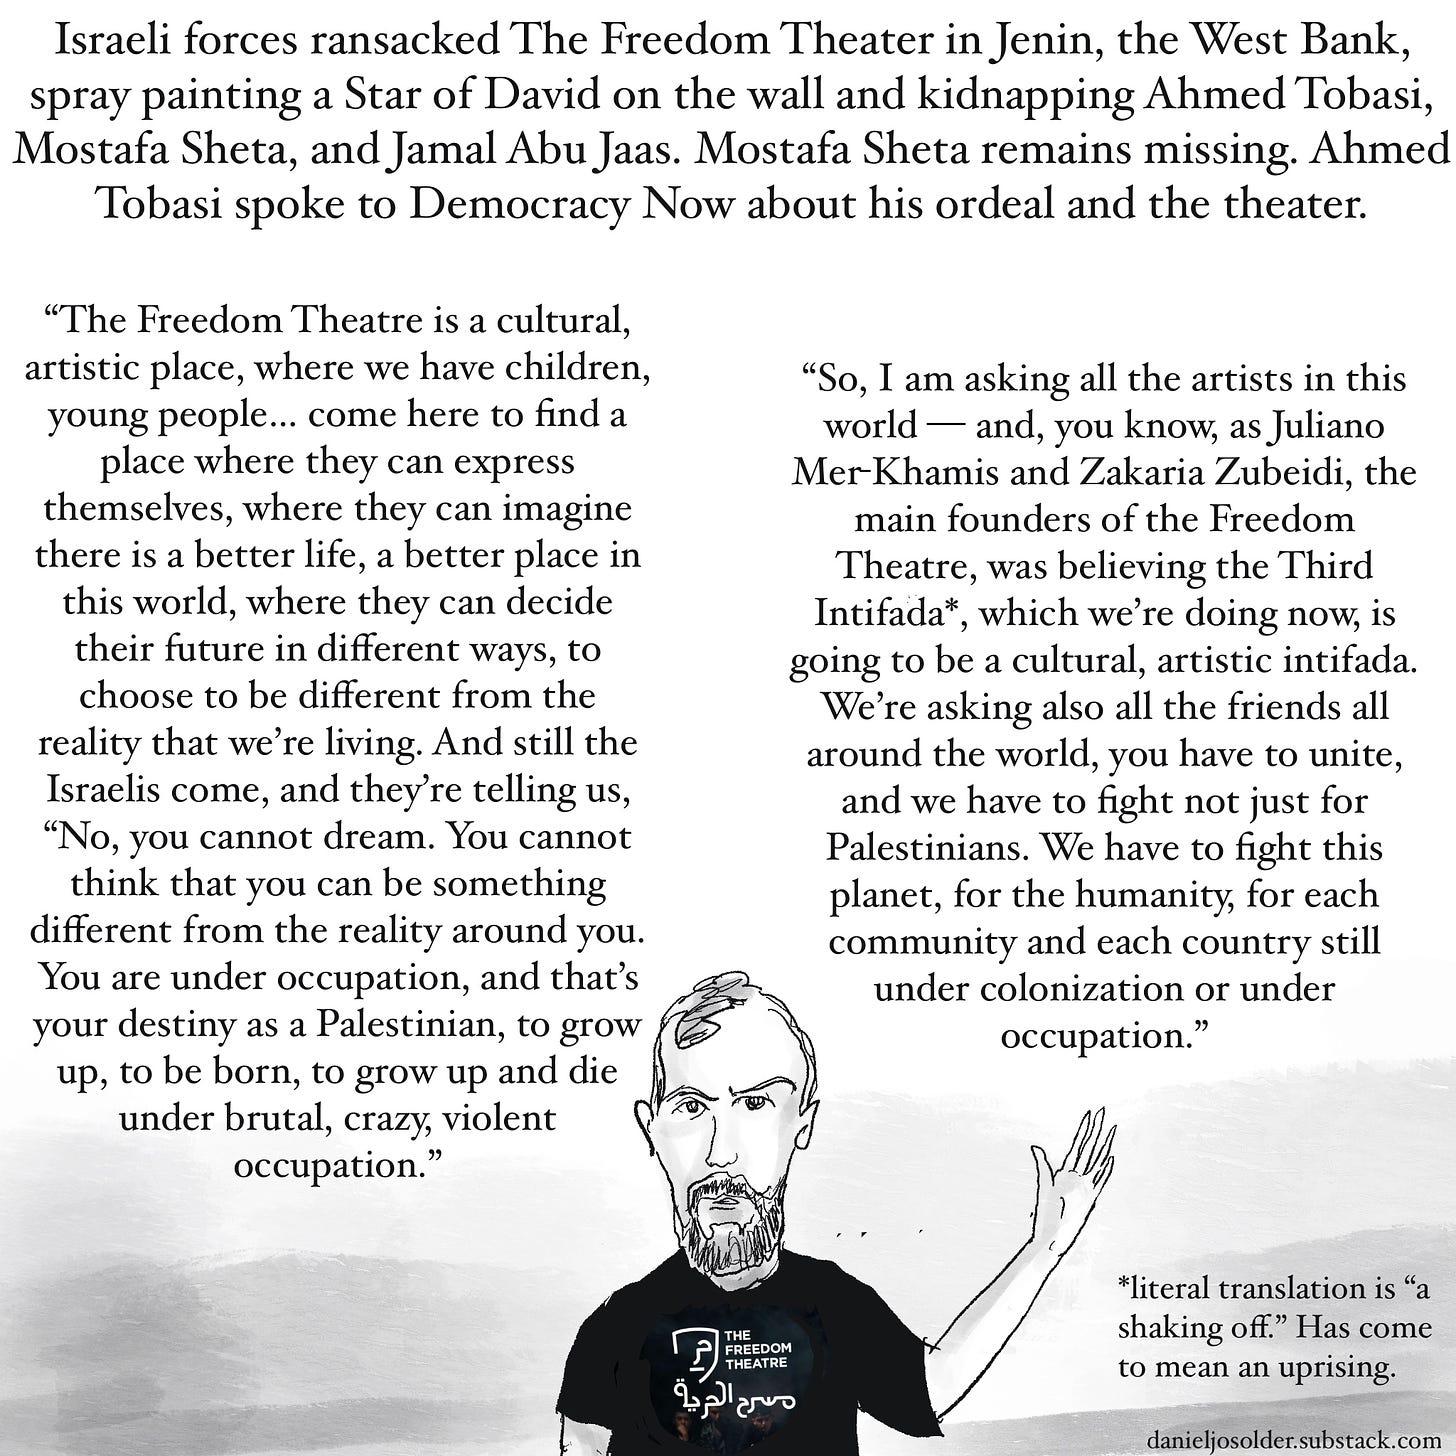 Israeli forces ransacked The Freedom Theater in the West Bank, spray painting the Star of David on the wall and kidnapping Ahmed Tobasi, Mostafa Sheta, and Jamal Abu Jaas Mostafa Sheta remains missing. Ahmed Tobasi spoke to Democracy Now about his ordeal and the theater. “The Freedom Theater Is it cultural, artistic place, where we have children, young people come here to find a place where they can express themselves where they can imagine there is a better life, a better place in this world, where they can decide their future in different ways, to choose to be different from the reality we're living in. And still the Israelis come, and they're telling us, “No you cannot dream. You cannot think that you can be something different from the reality around you. You are under occupation, and that's your destiny as a Palestinian, to grow up, to be born, to grow up and die under brutal crazy violent occupation. So I am asking all the artists in this world— and, you know, as Juliano Mer-Khamis and Zakaria Zubeidi,  the main founders of The Freedom Theater, was believing the Third Intifada [uprising], Which we're doing now, is going to be a cultural artistic intifada. we're also asking the friends all around the world, you have to unite, and we have to fight not just for Palestinians. we have to fight this planet, for the humanity, for each community and each country still under colonization or under occupation. Image description: A drawing of Ahmed Tobasi raising his hand. 